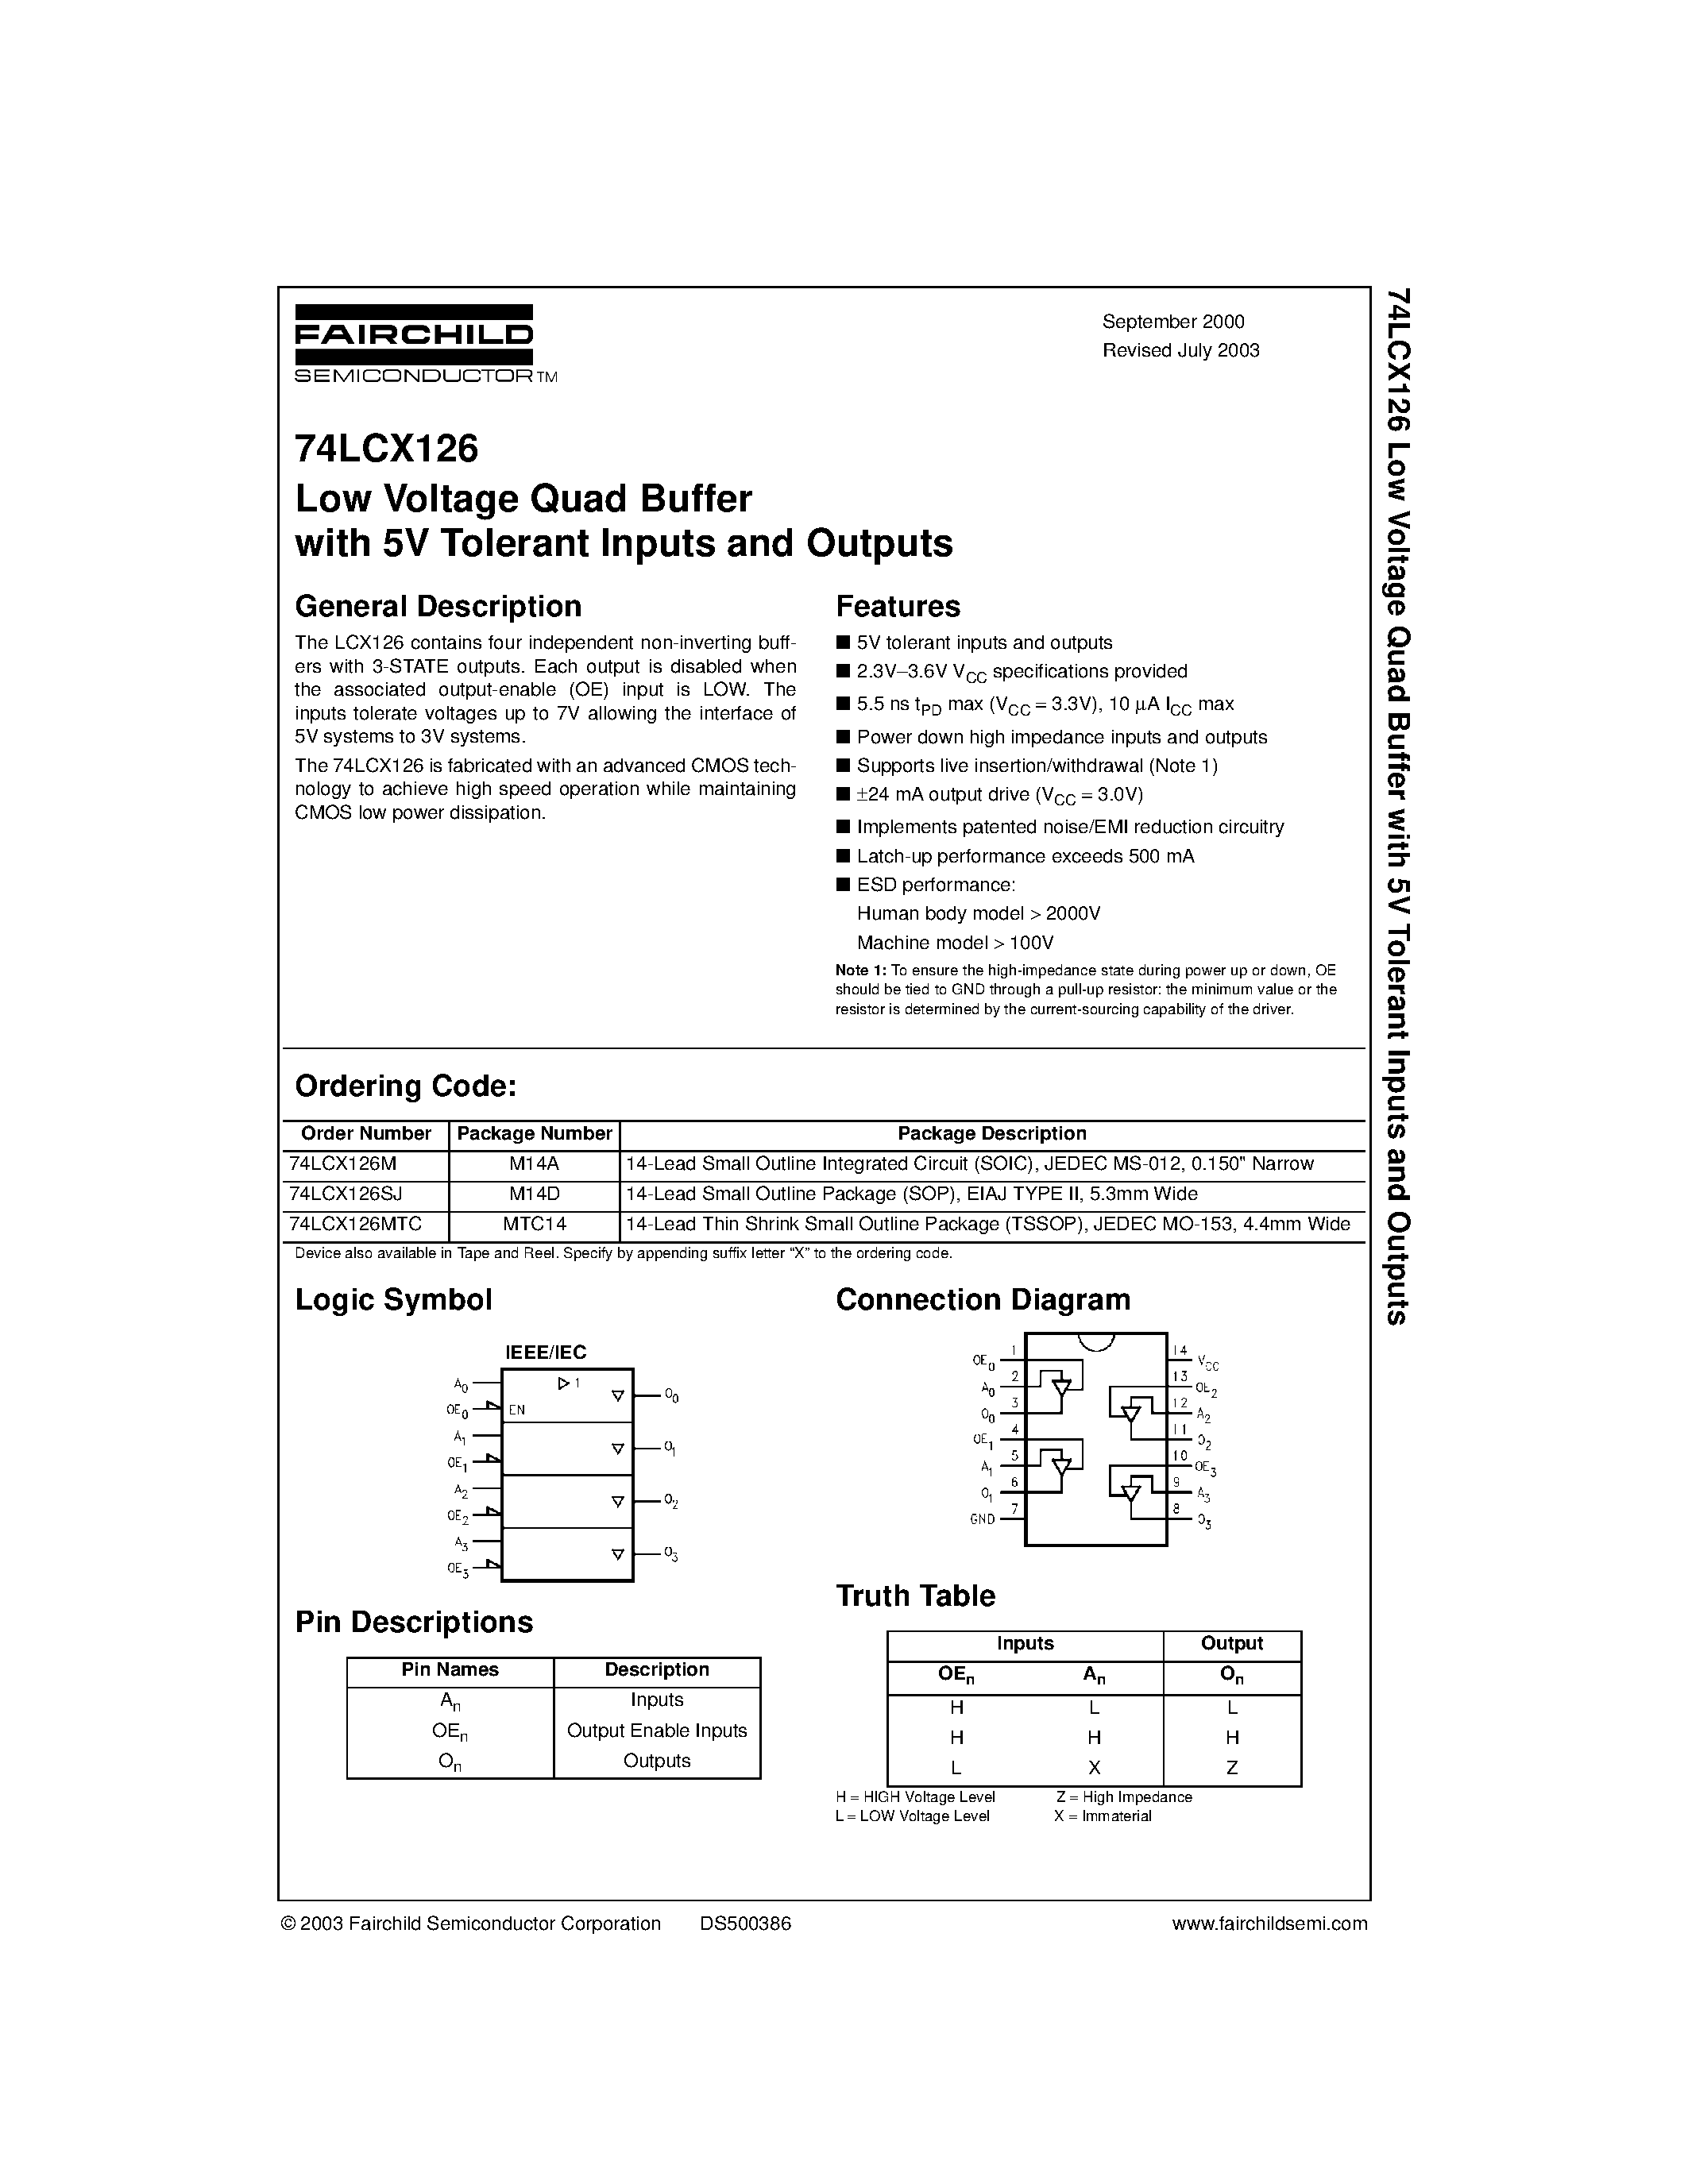 Datasheet 74LCX126SJ - Low Voltage Quad Buffer with 5V Tolerant Inputs and Outputs page 1